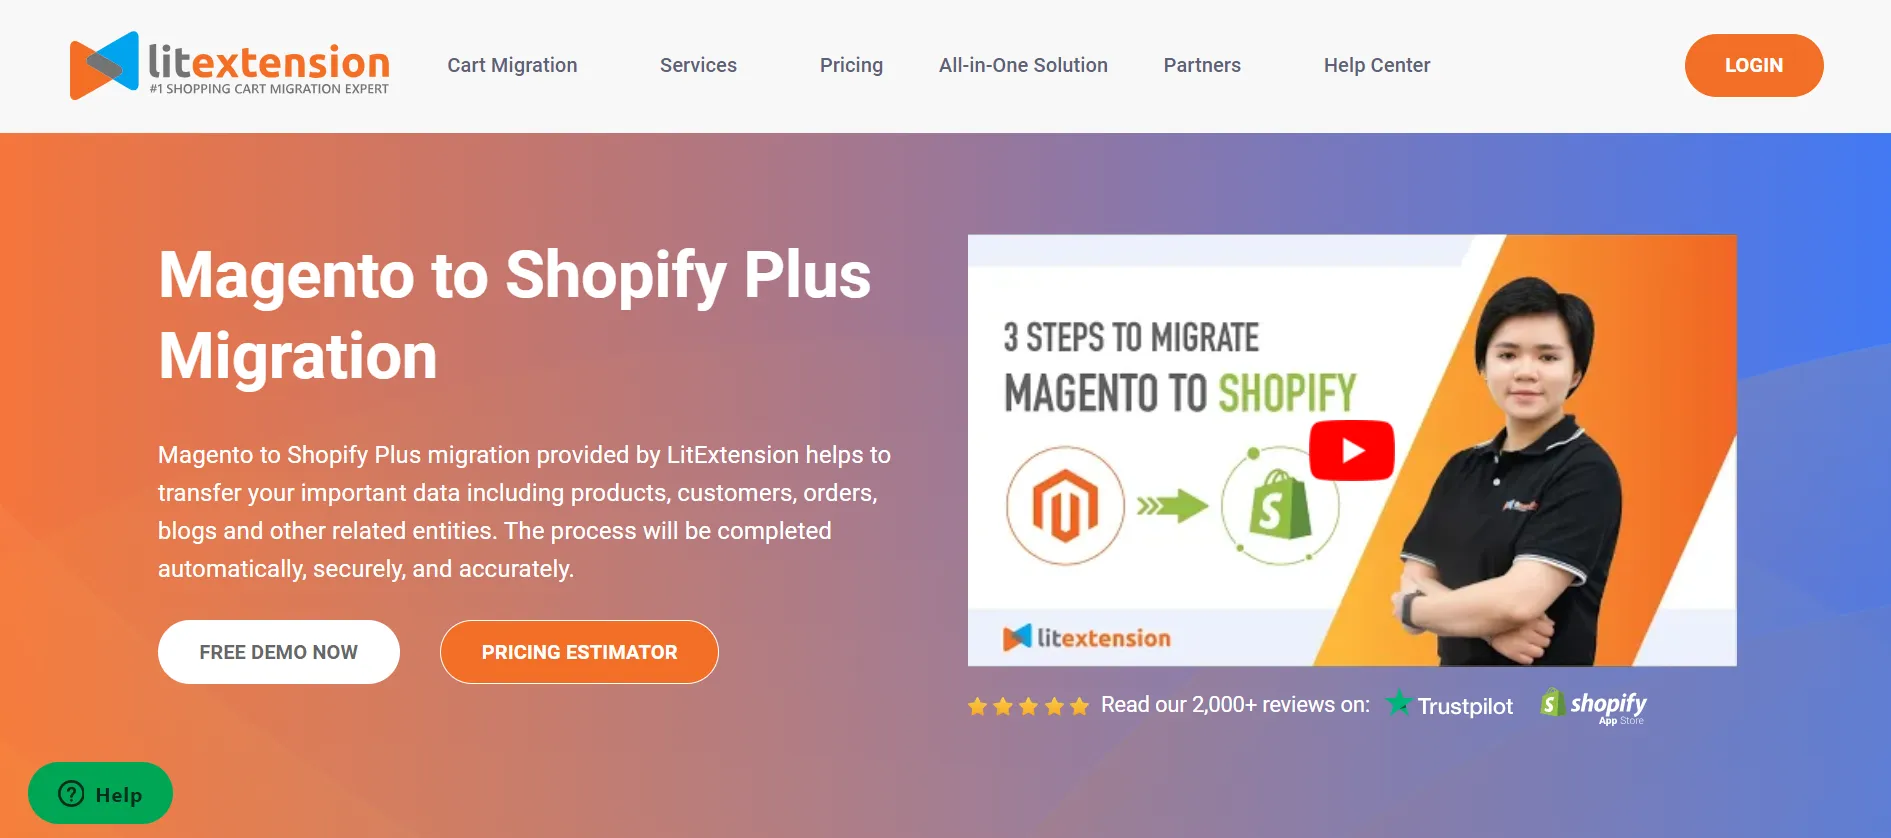 LitExtension’s Magento to Shopify Plus migration